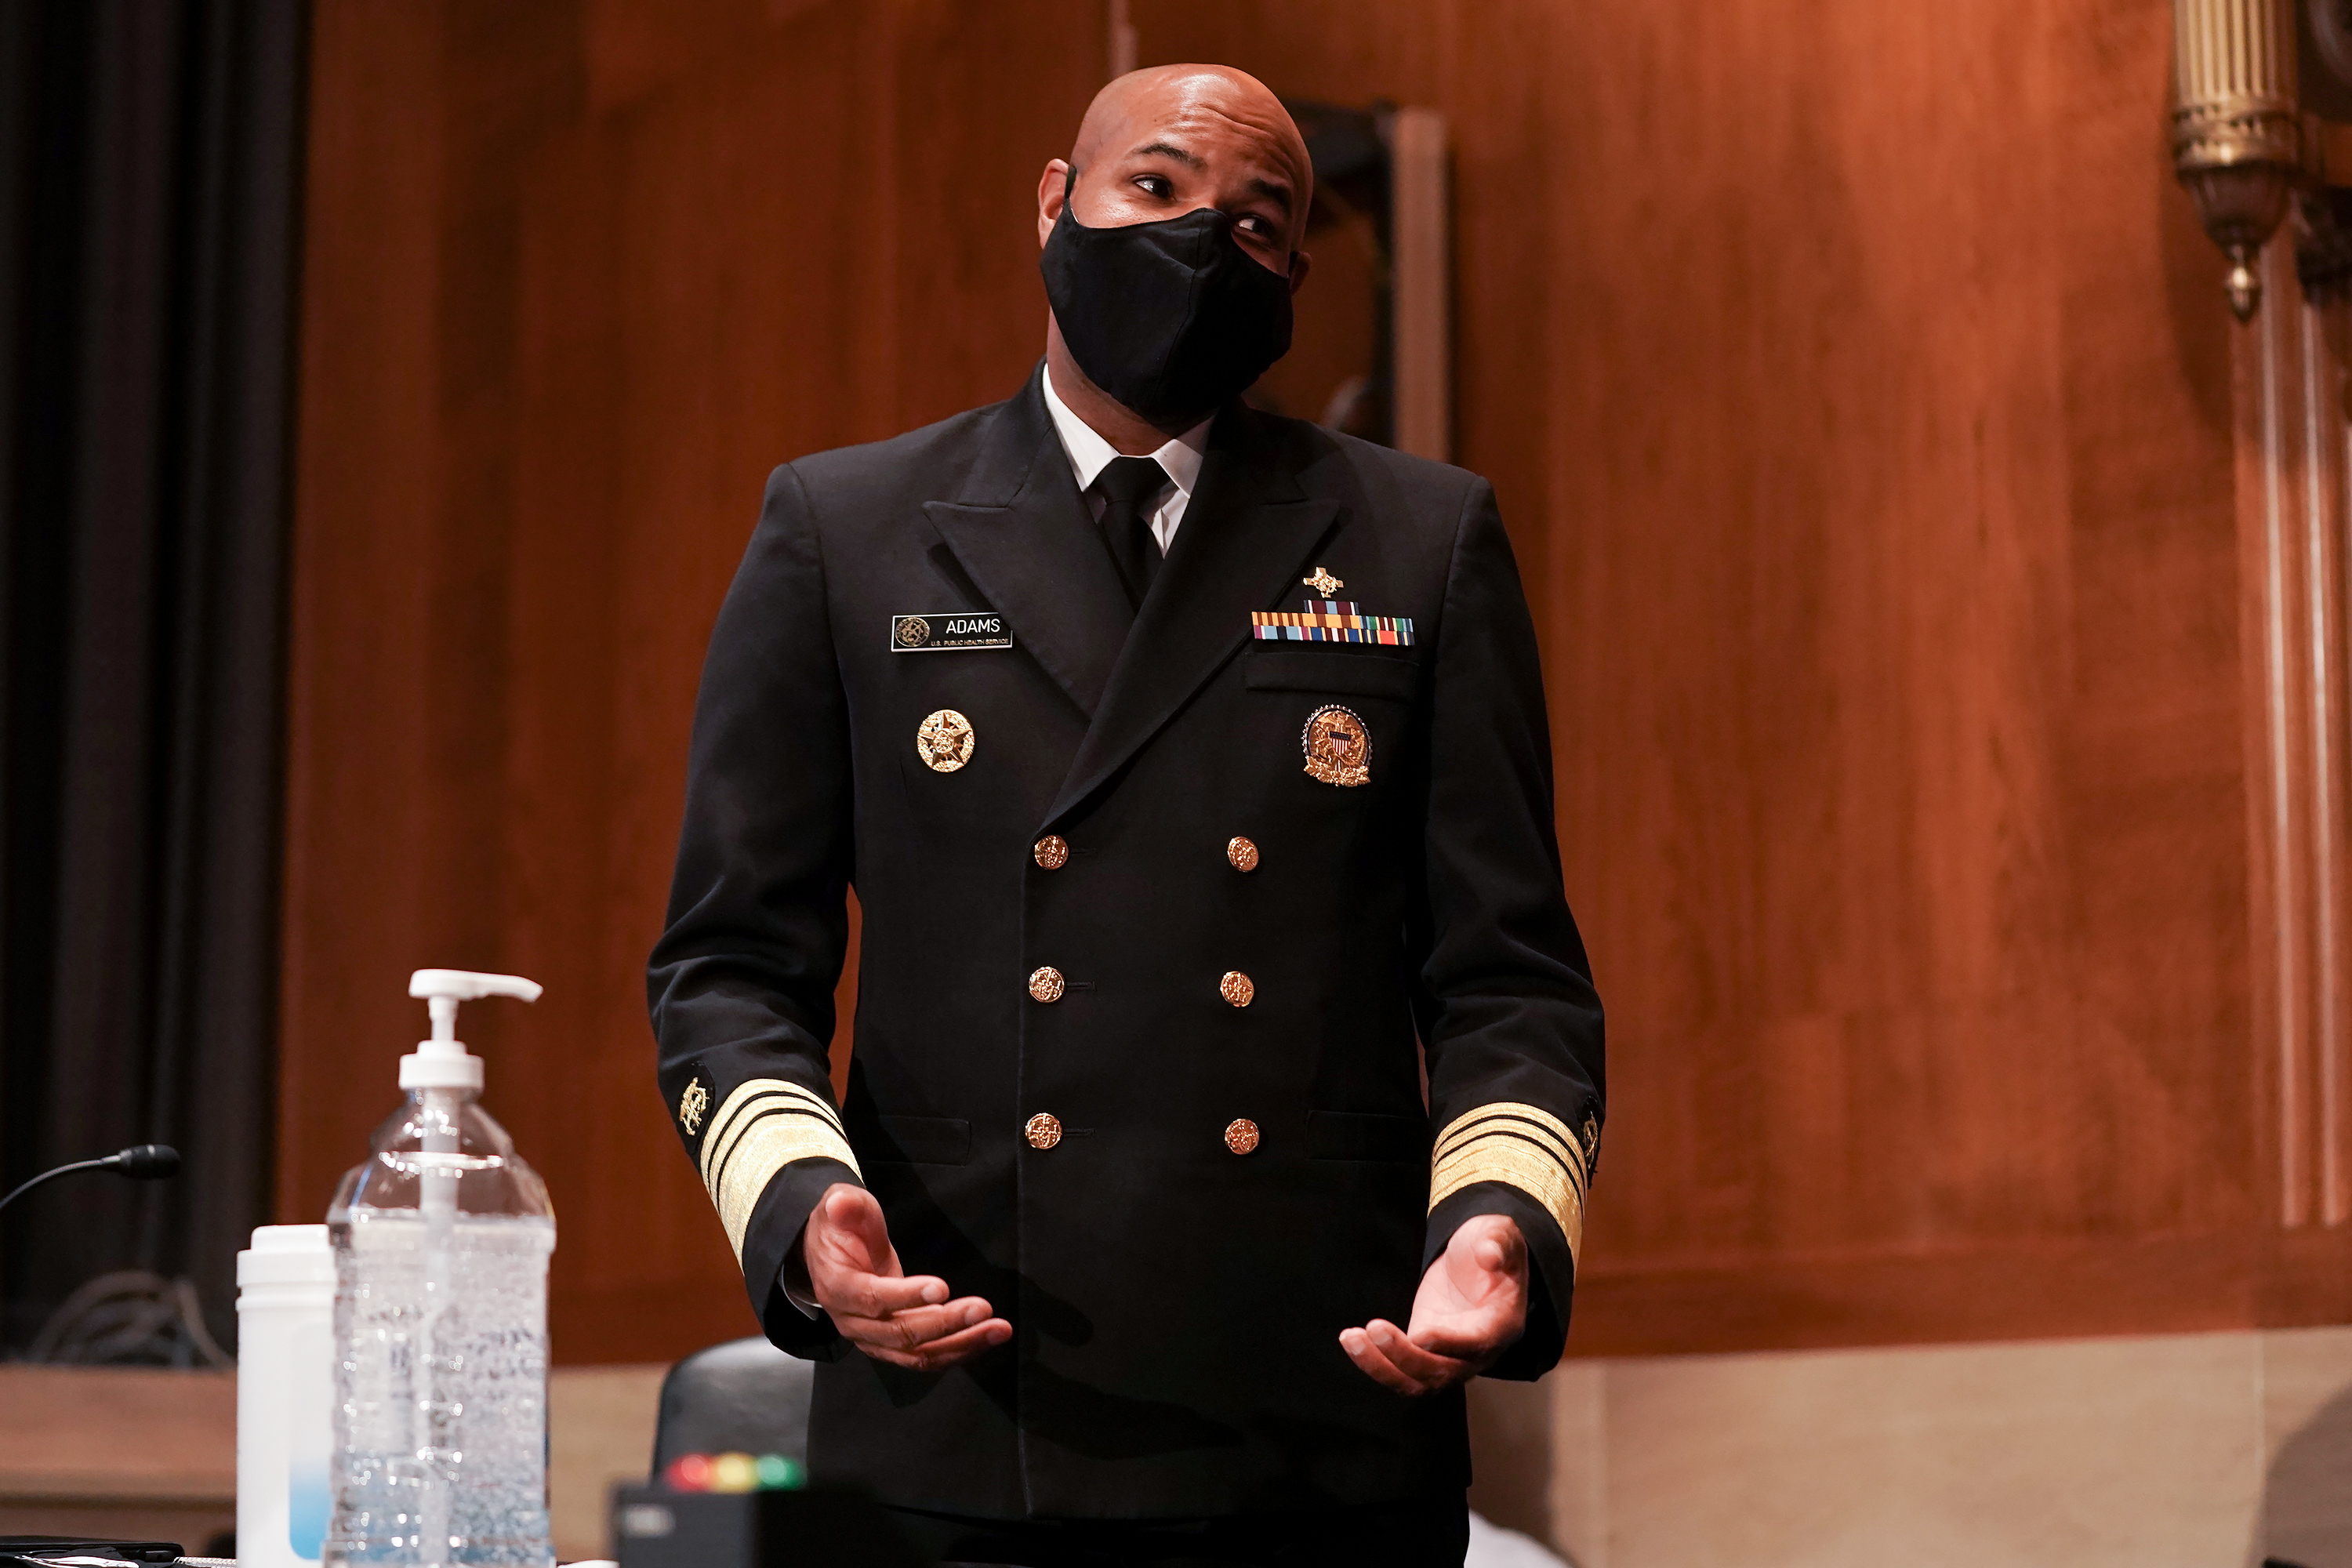 US Surgeon General Dr. Jerome Adams arrives for a hearing in Washington, DC, on September 9.